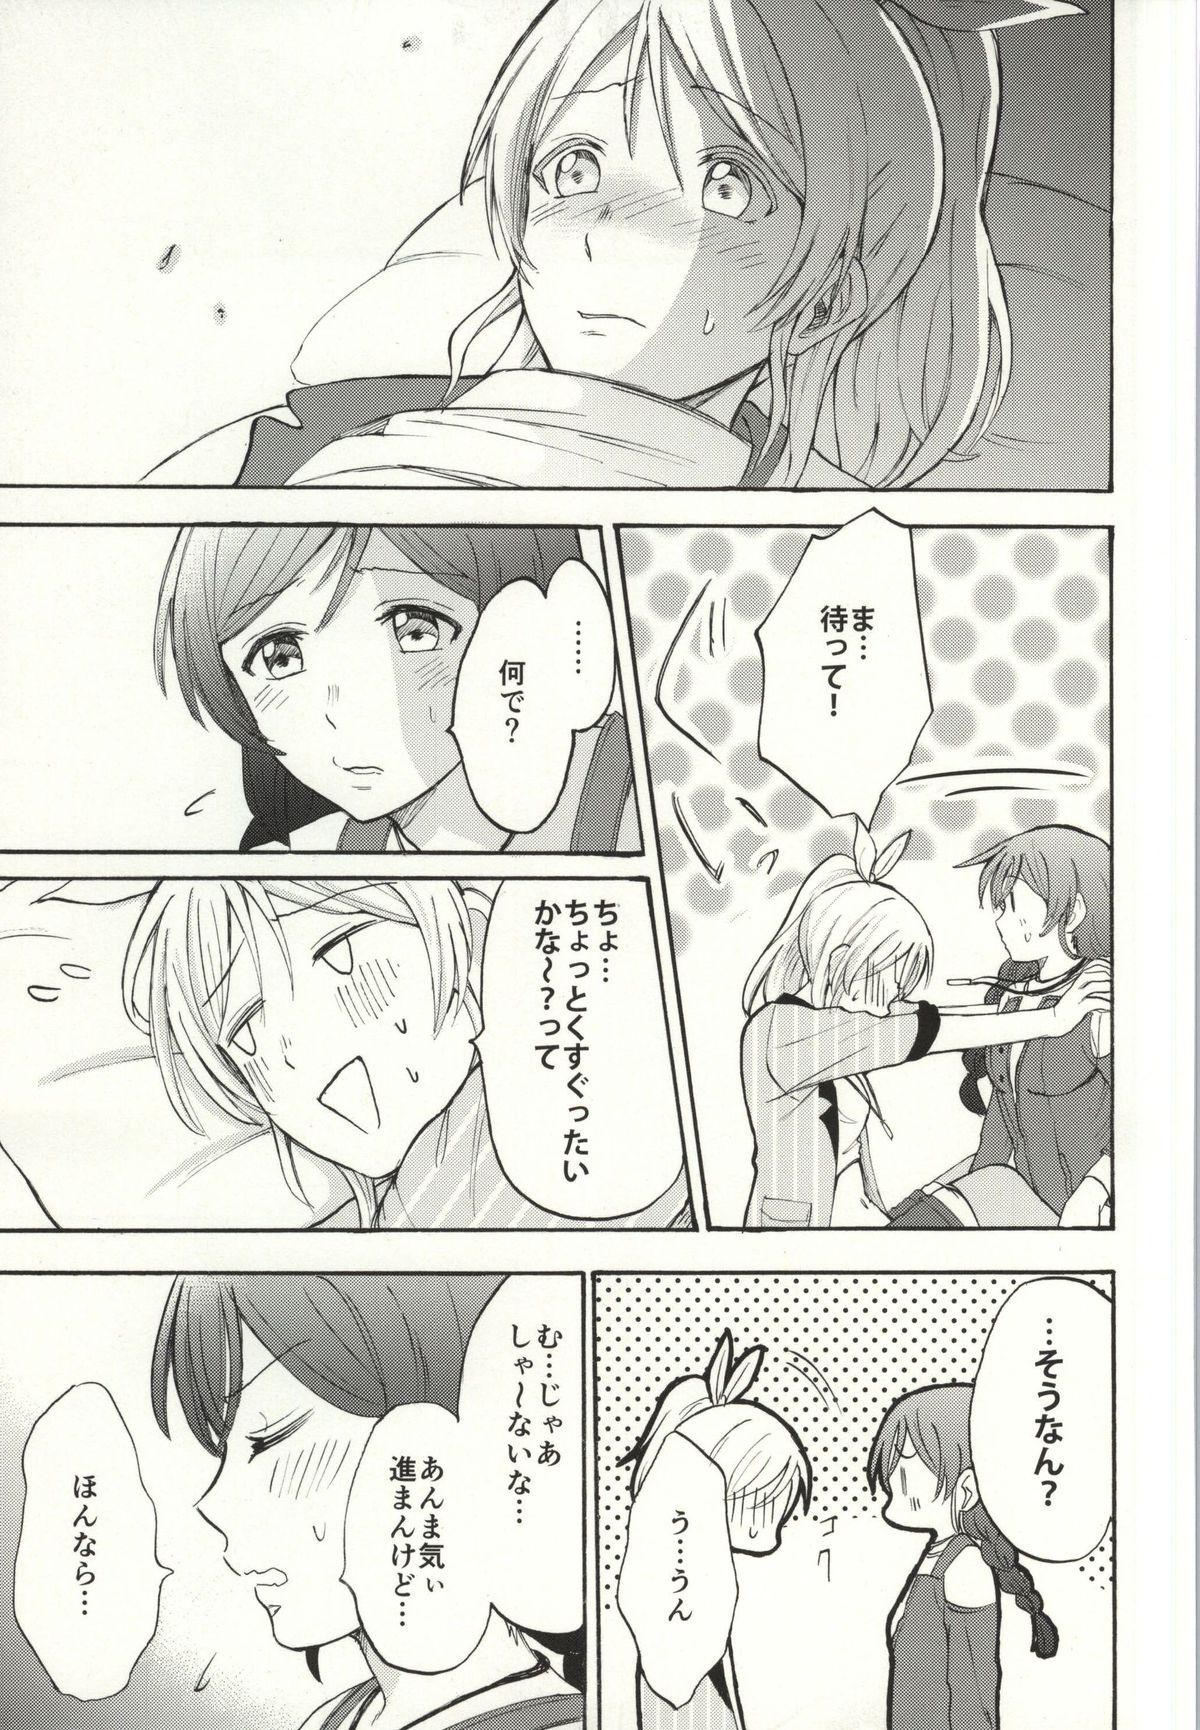 Eating Pussy Dame Dame! My Darling - Love live Stretch - Page 11